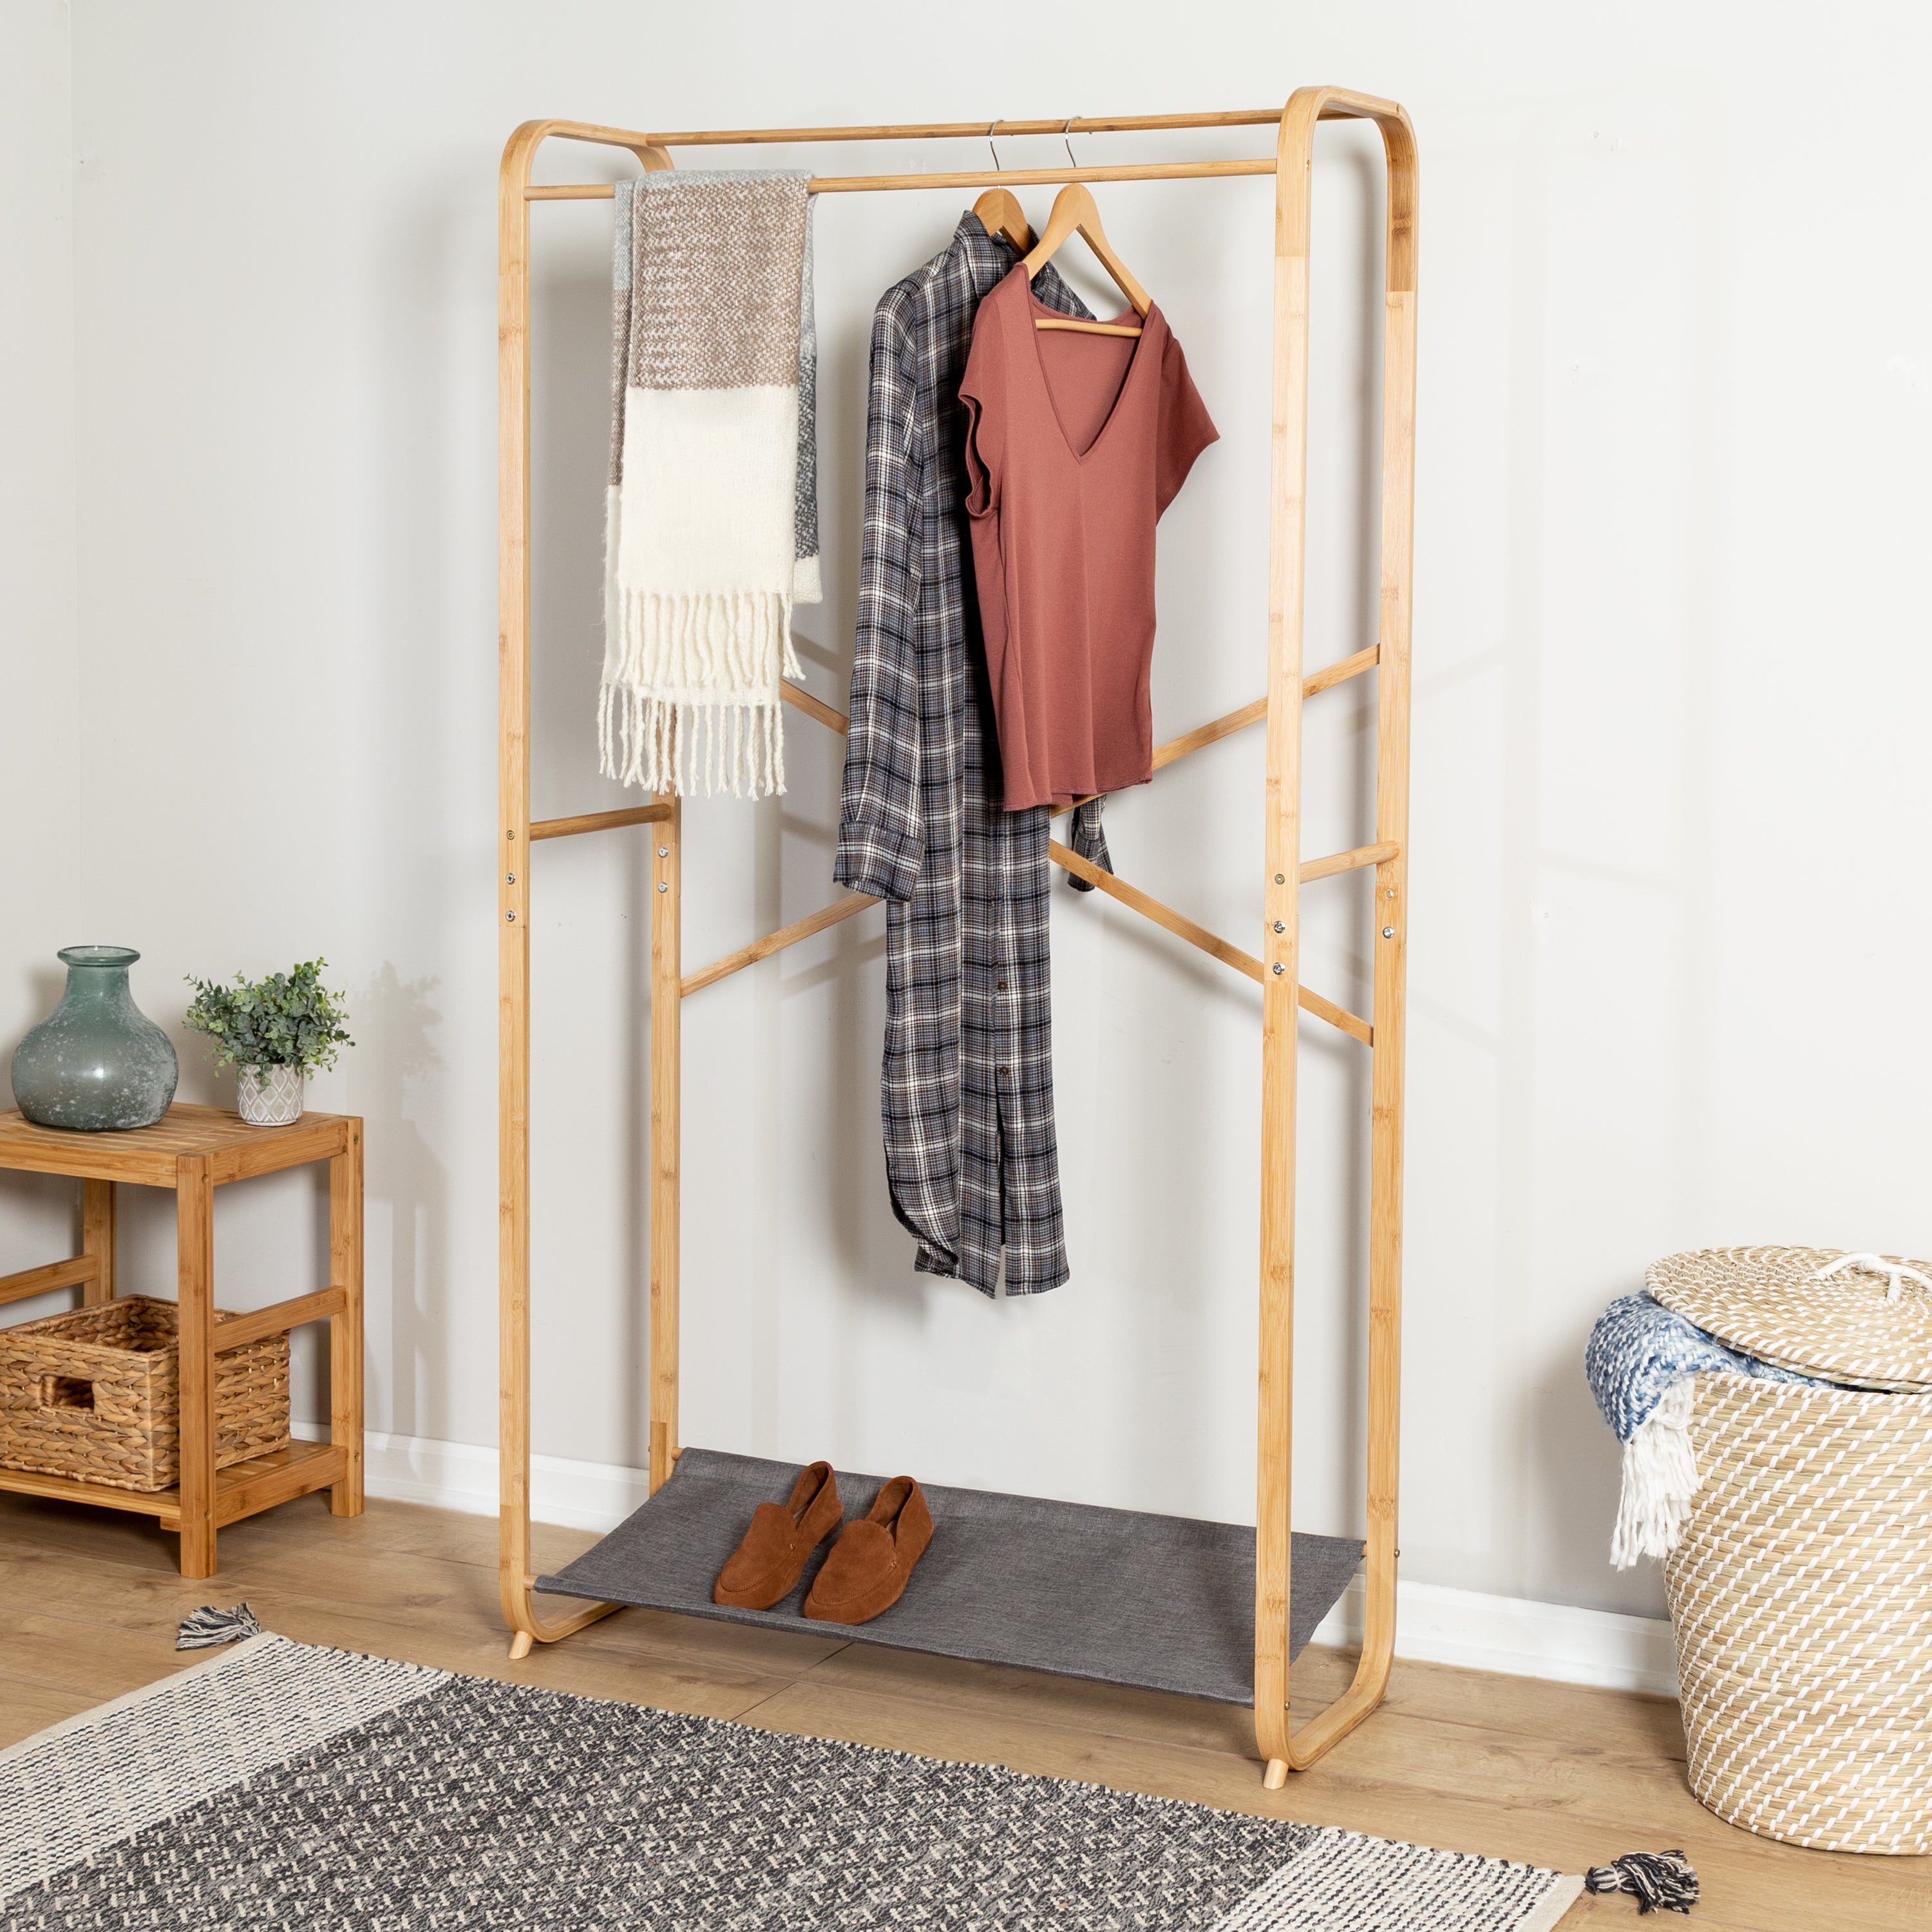 6 Tier Ladder Strong Wooden Clothes Rail Garment Rack with Top Rod Hanging  Shelf